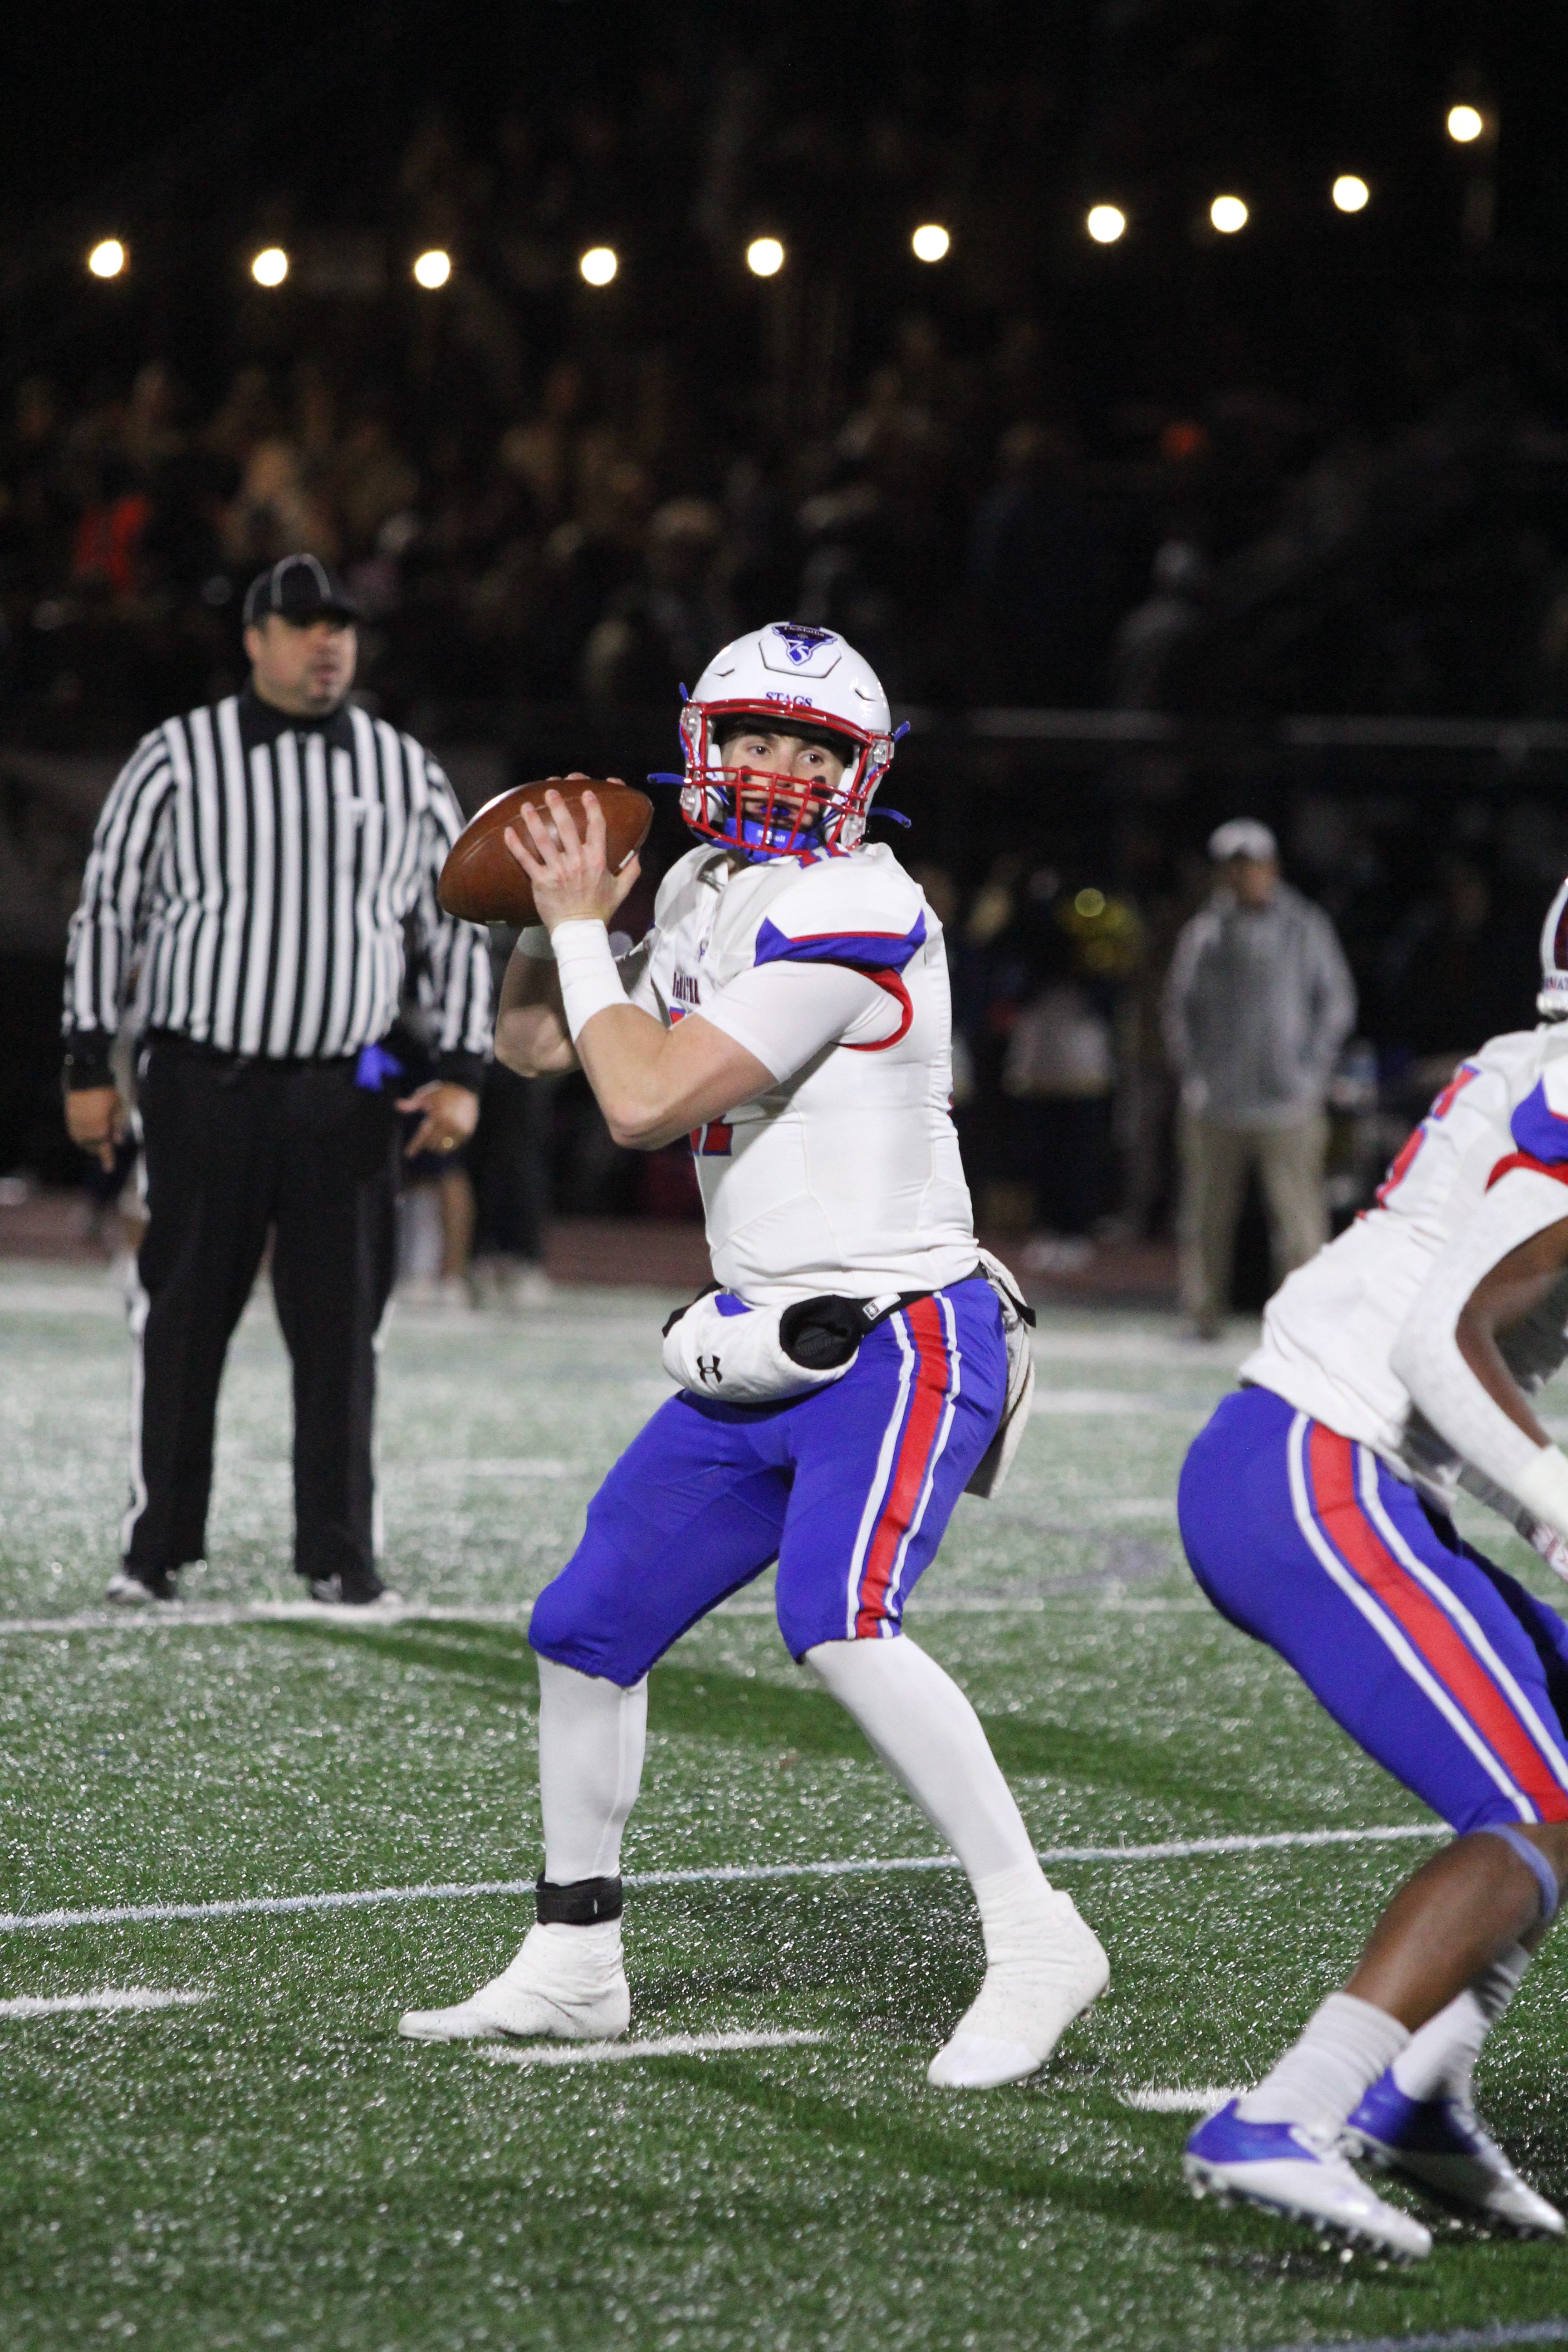 Quarterback’s unlikely return from injury helps lead DeMatha to victory; playoffs start this week